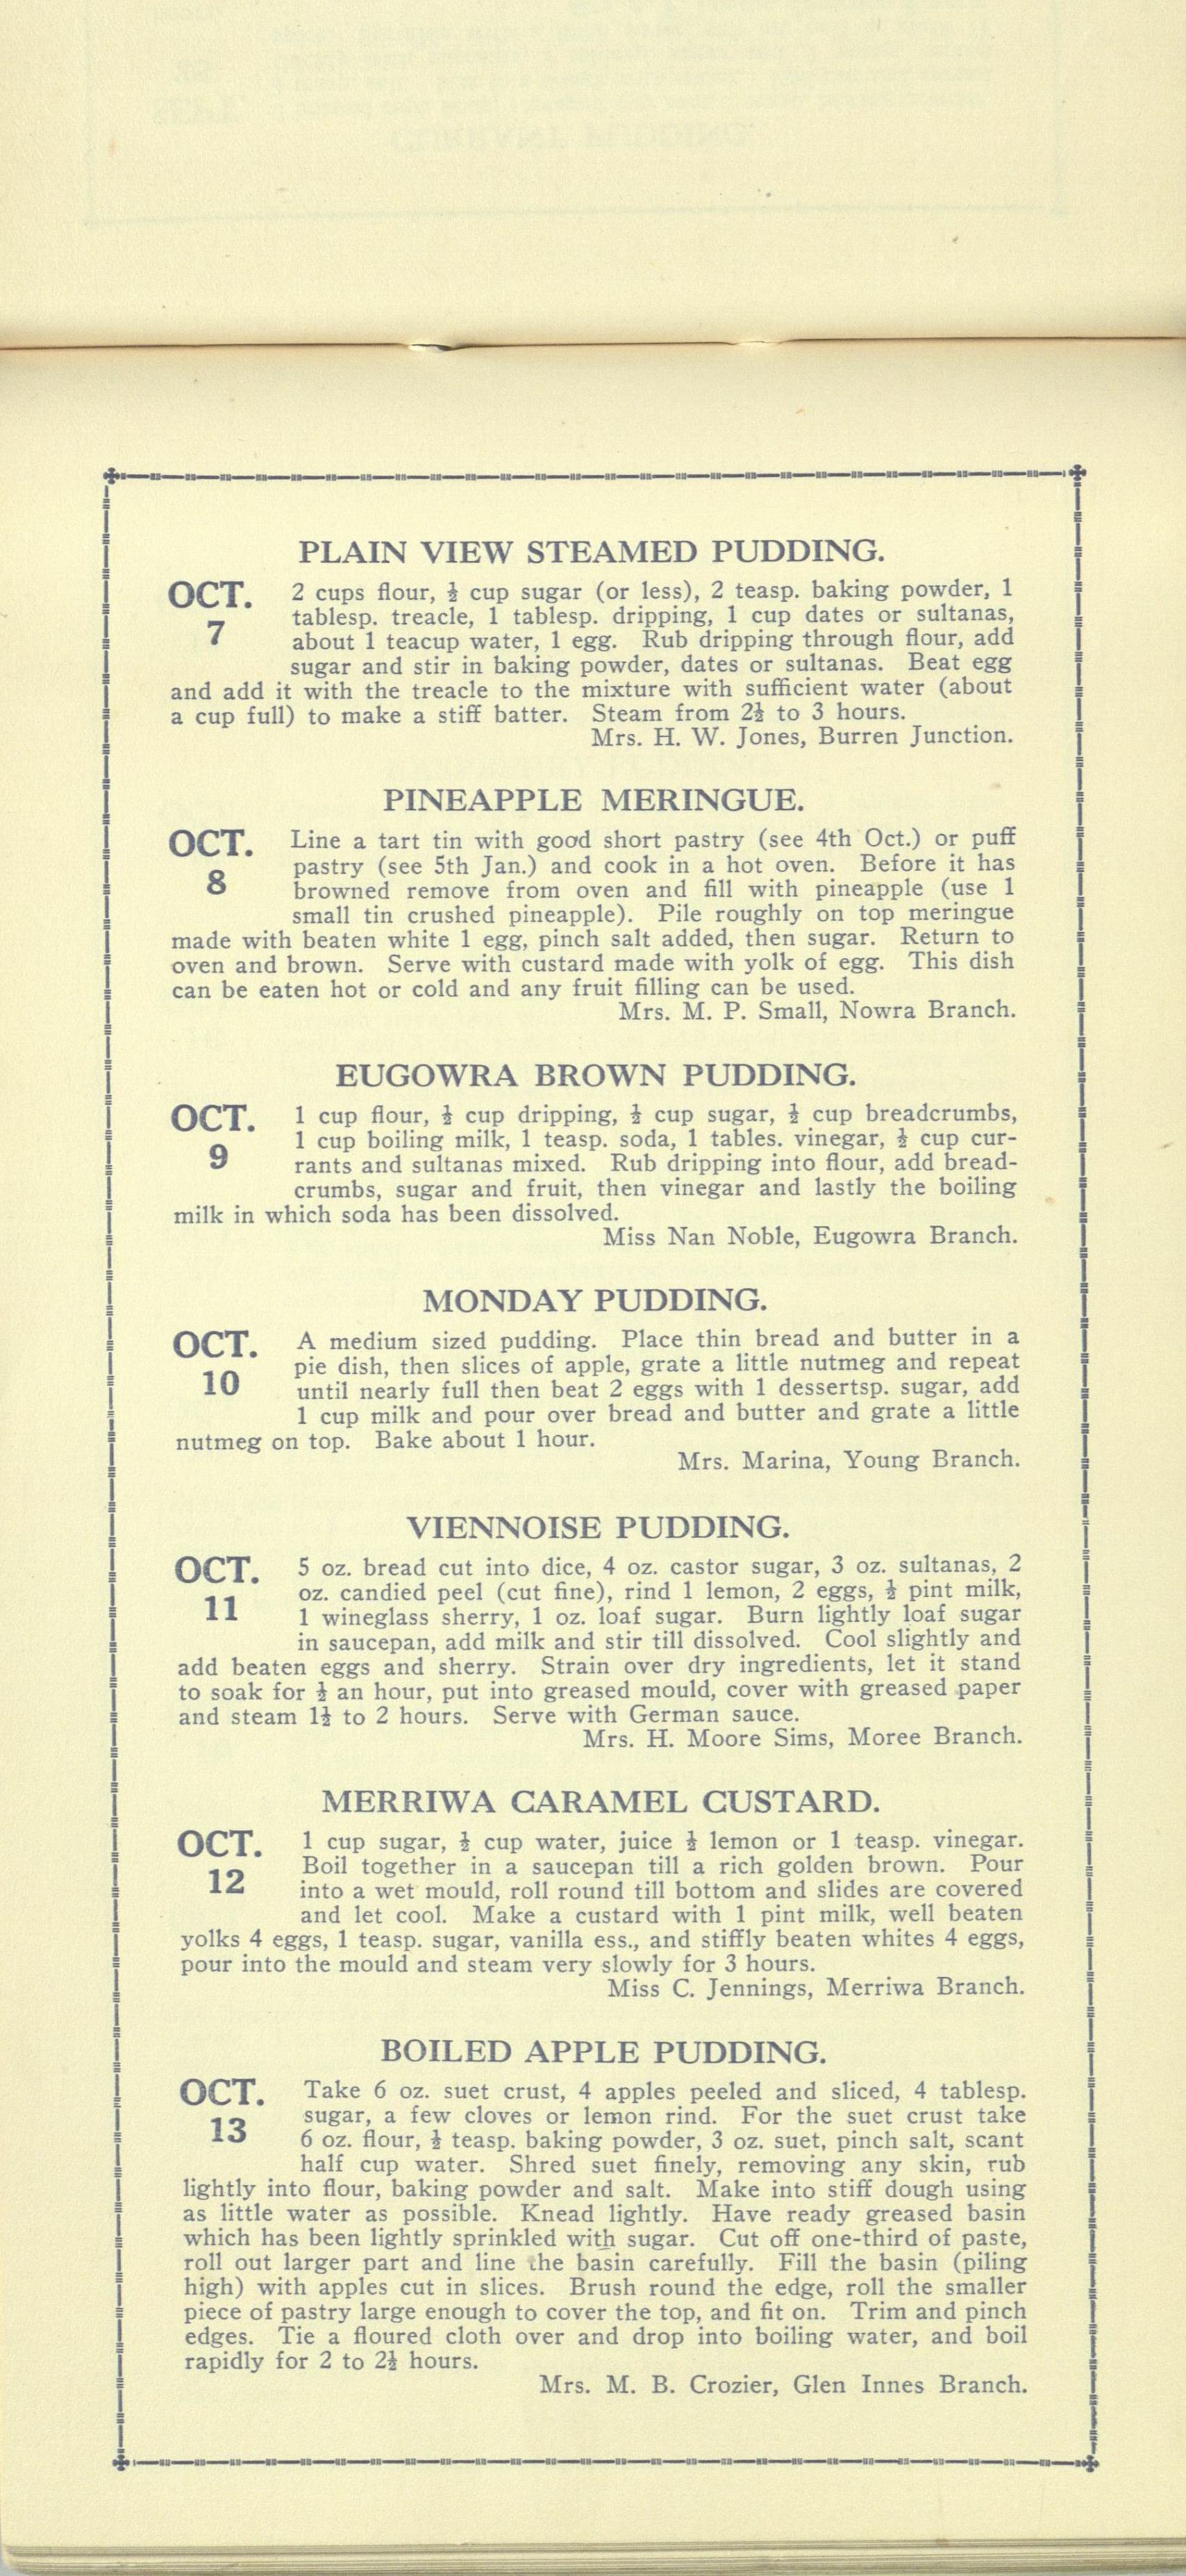  Country Women's Association of New South Wales calendar of puddings from 1931 (7 October - 13 October) 